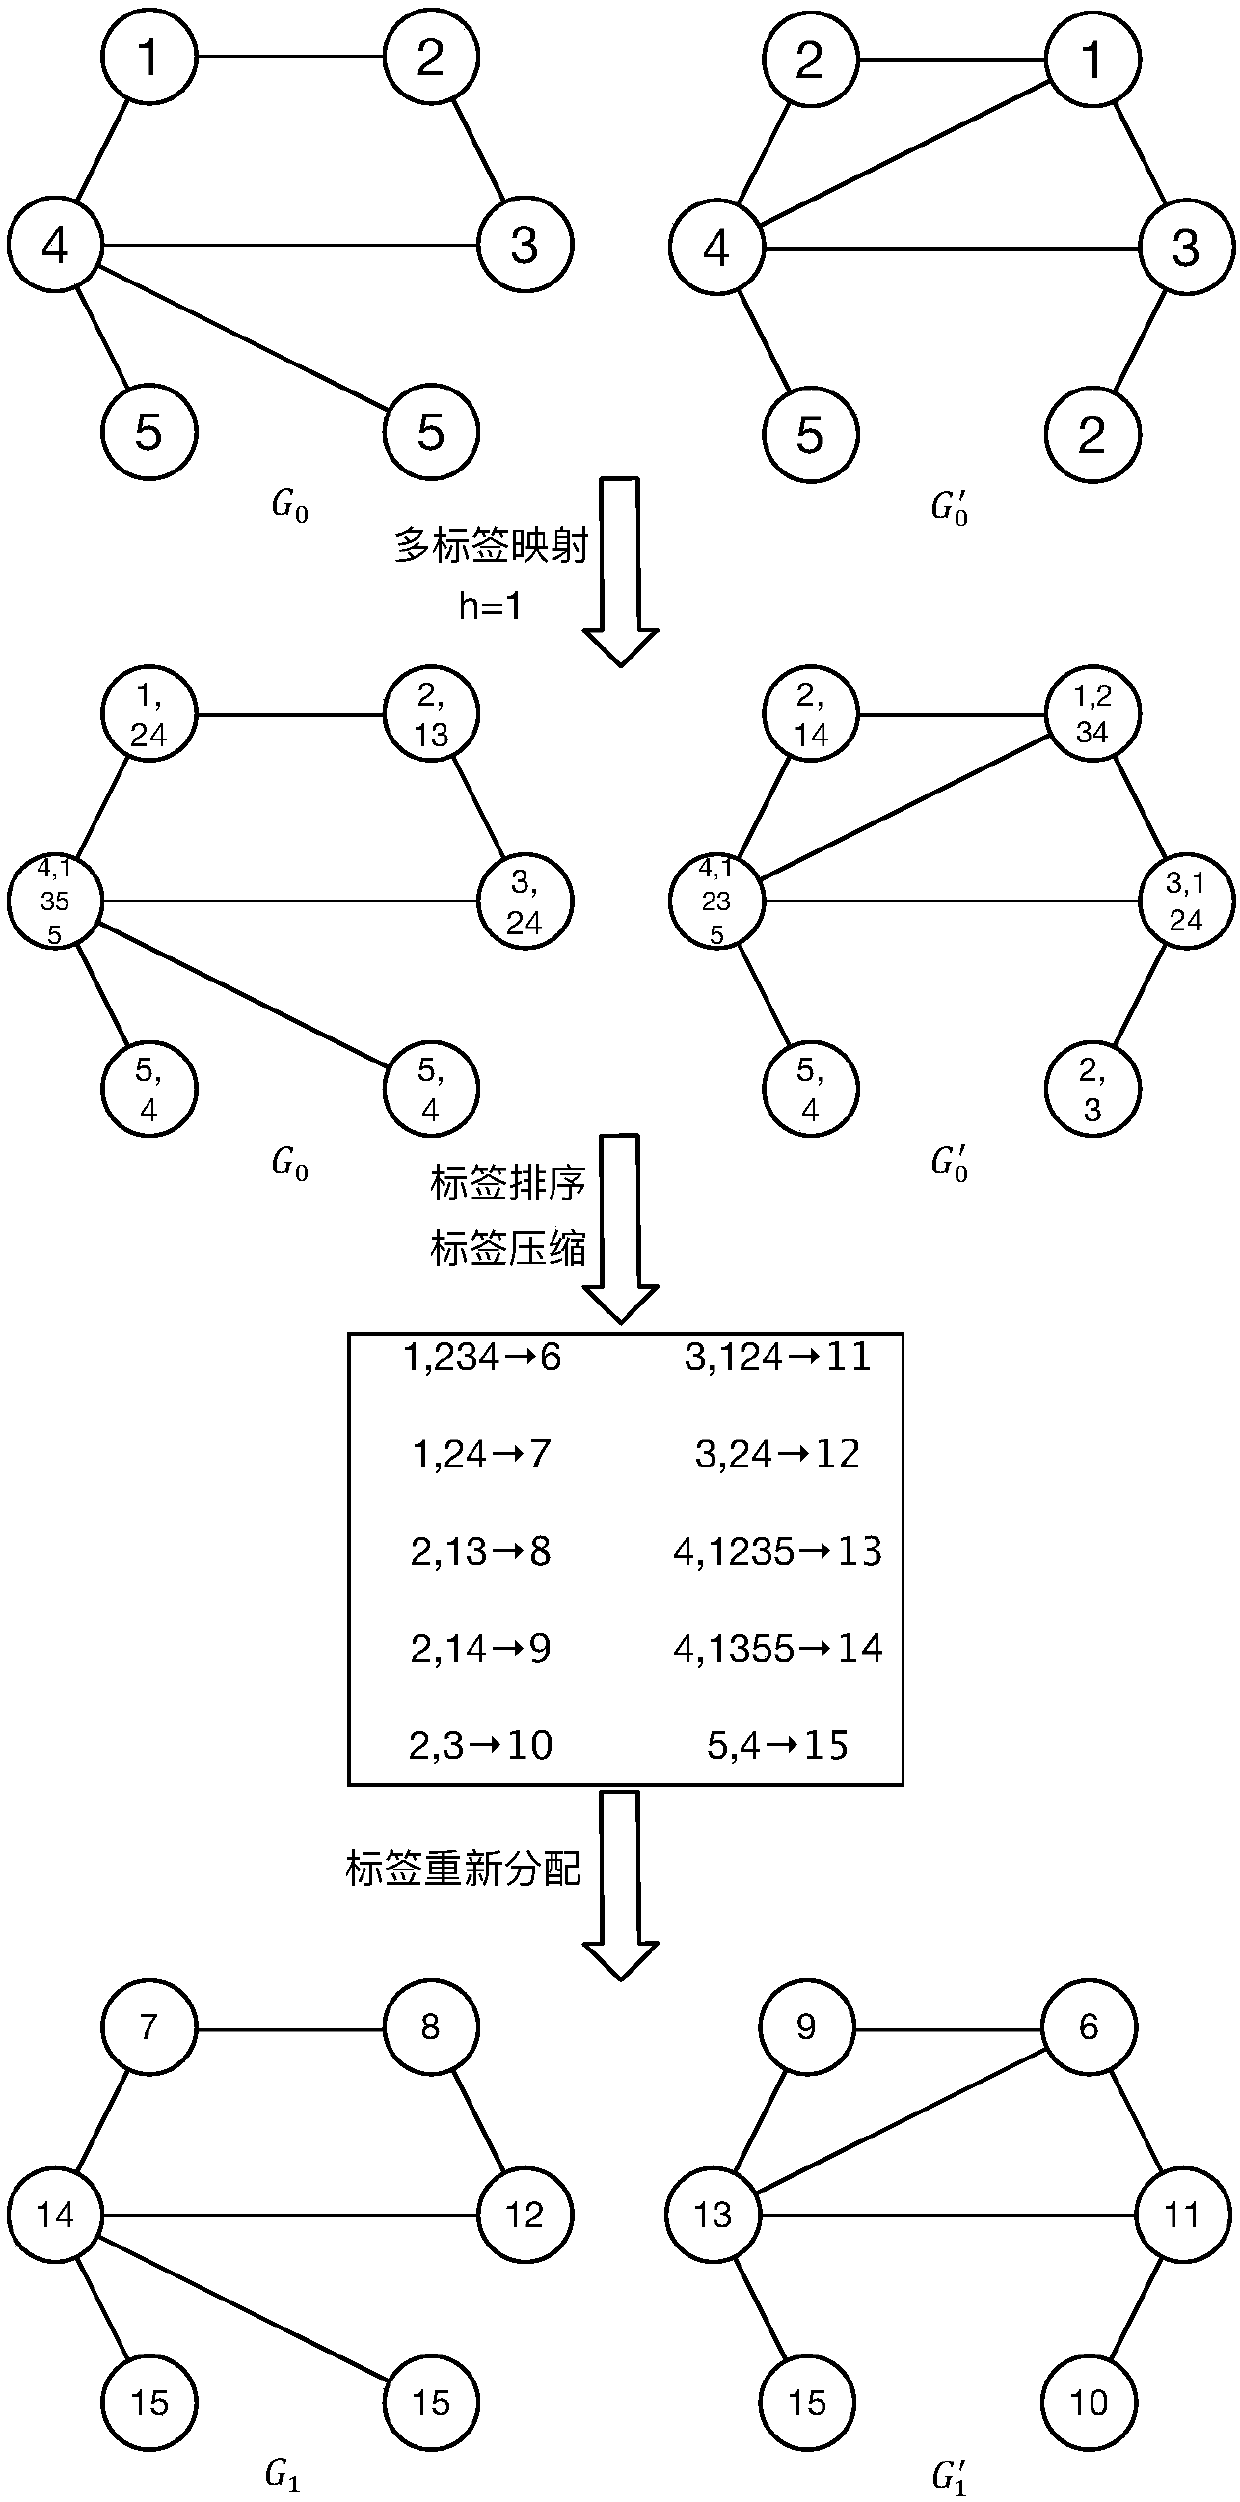 A graph classification method based on graph set reconstruction and graph kernel dimensionality reduction